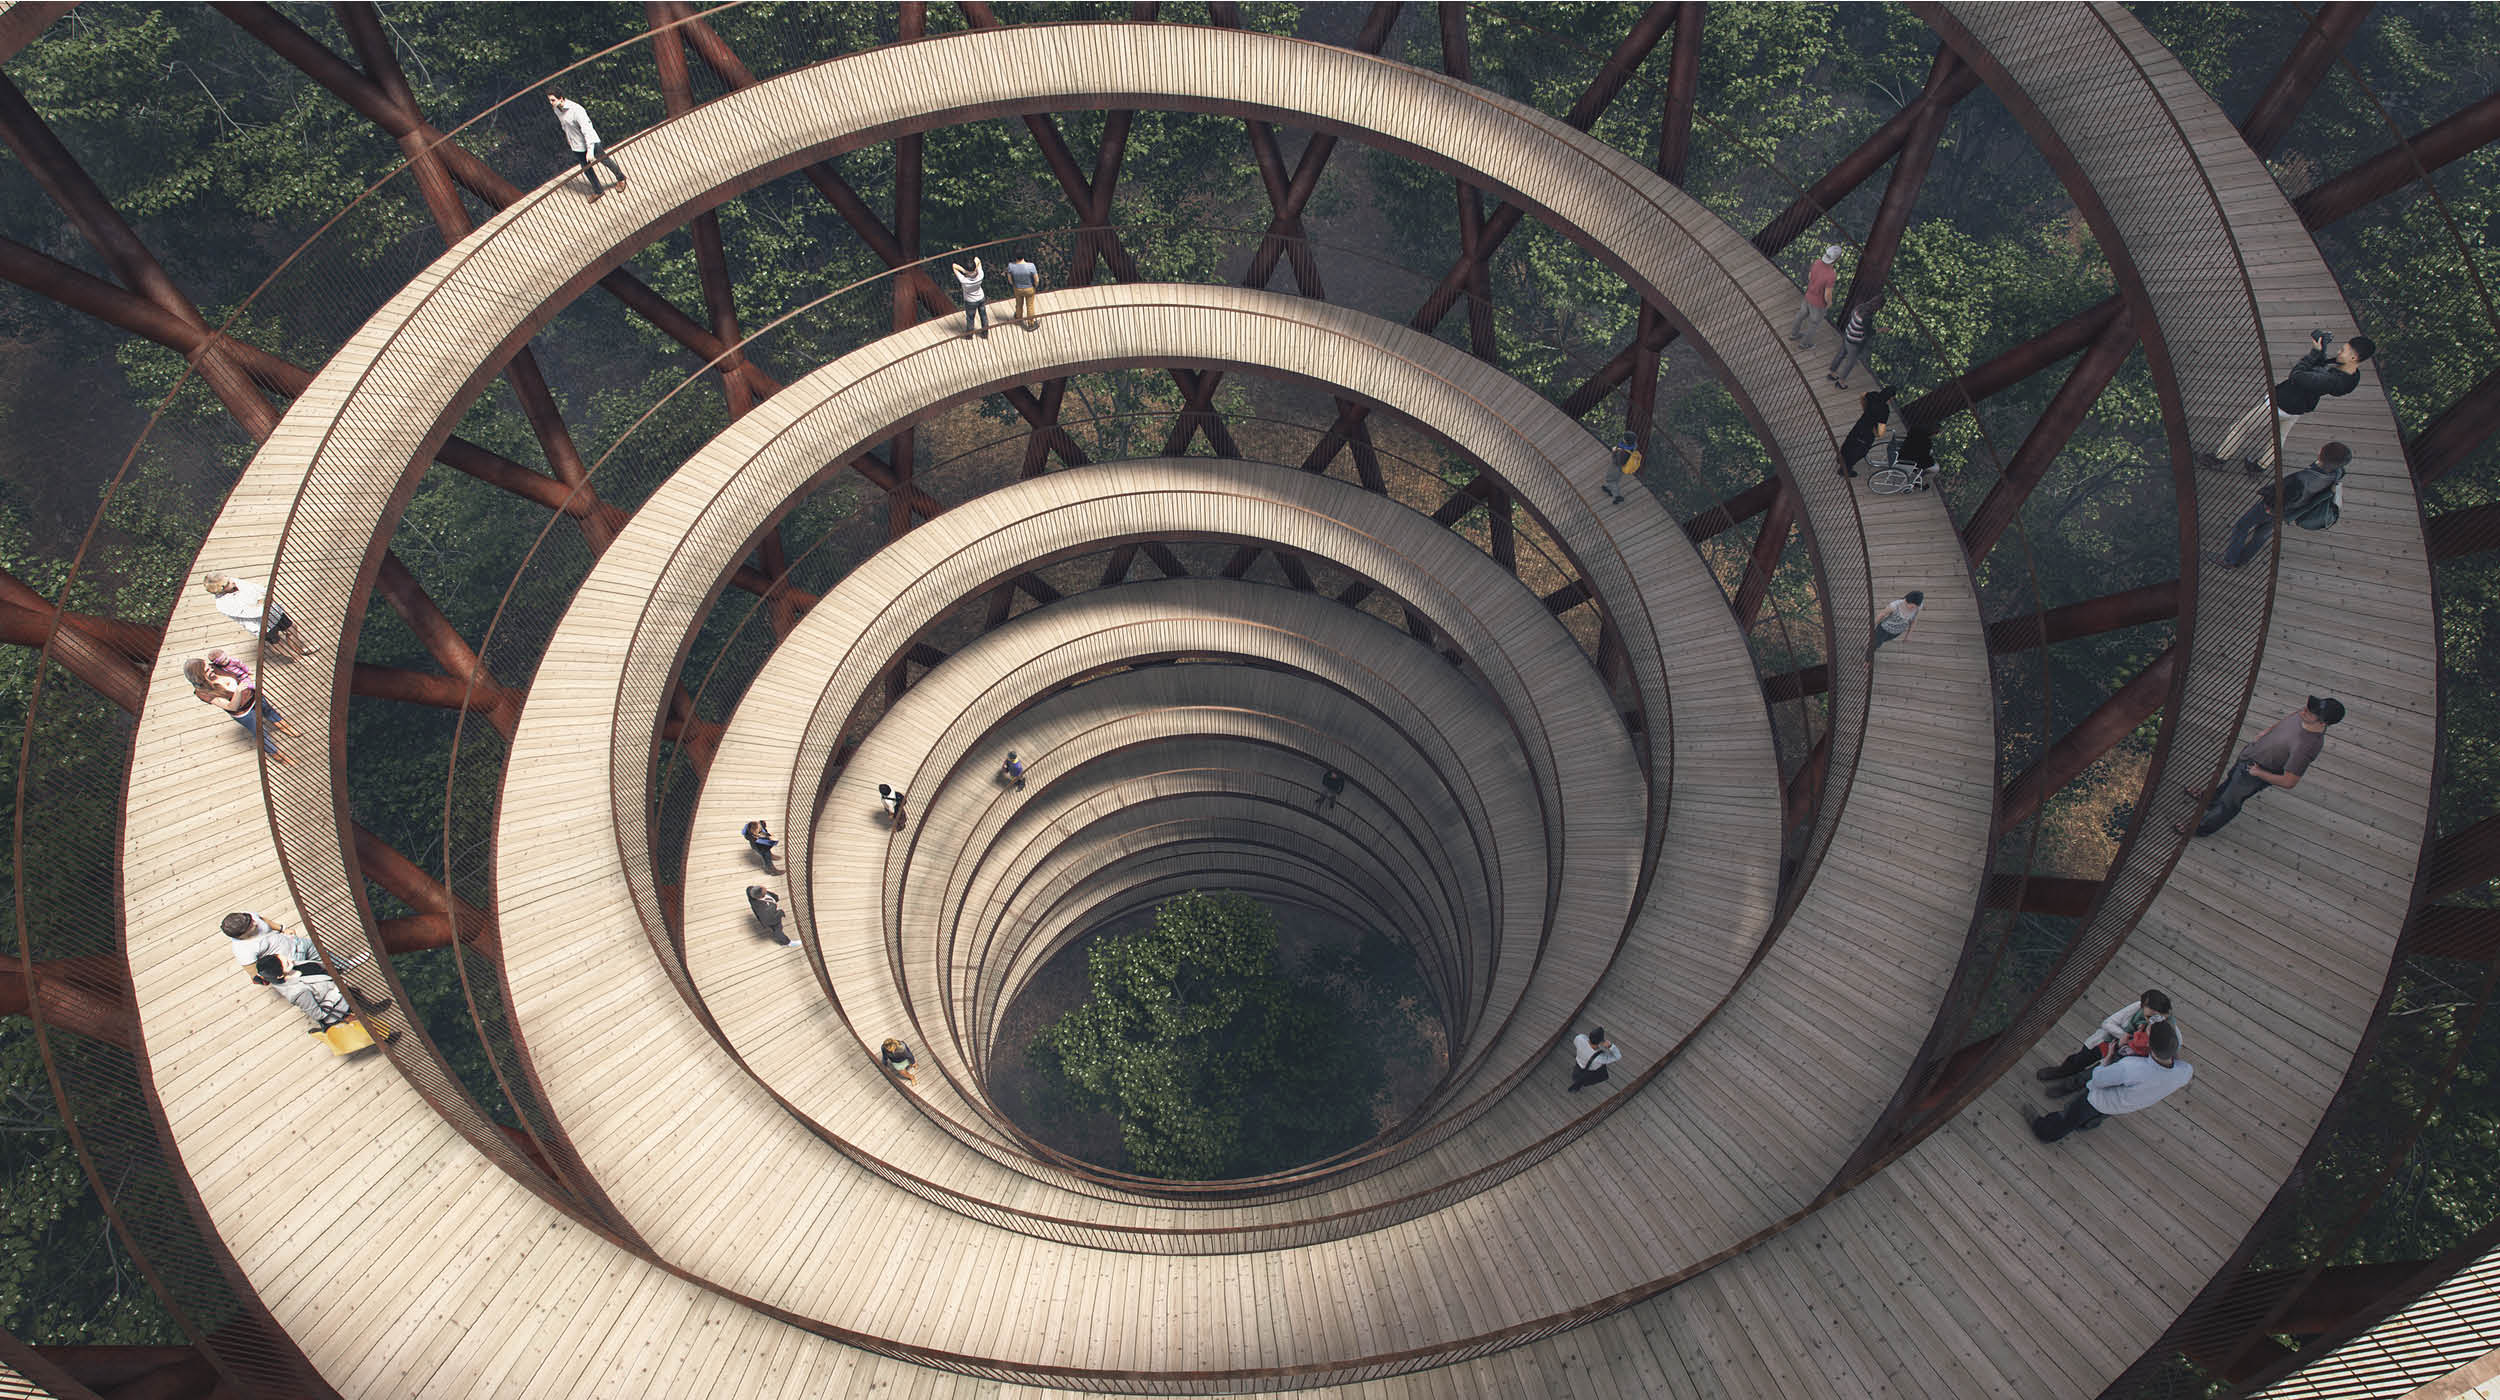 And finally... Danish firm opens 600-metre Treetop Experience